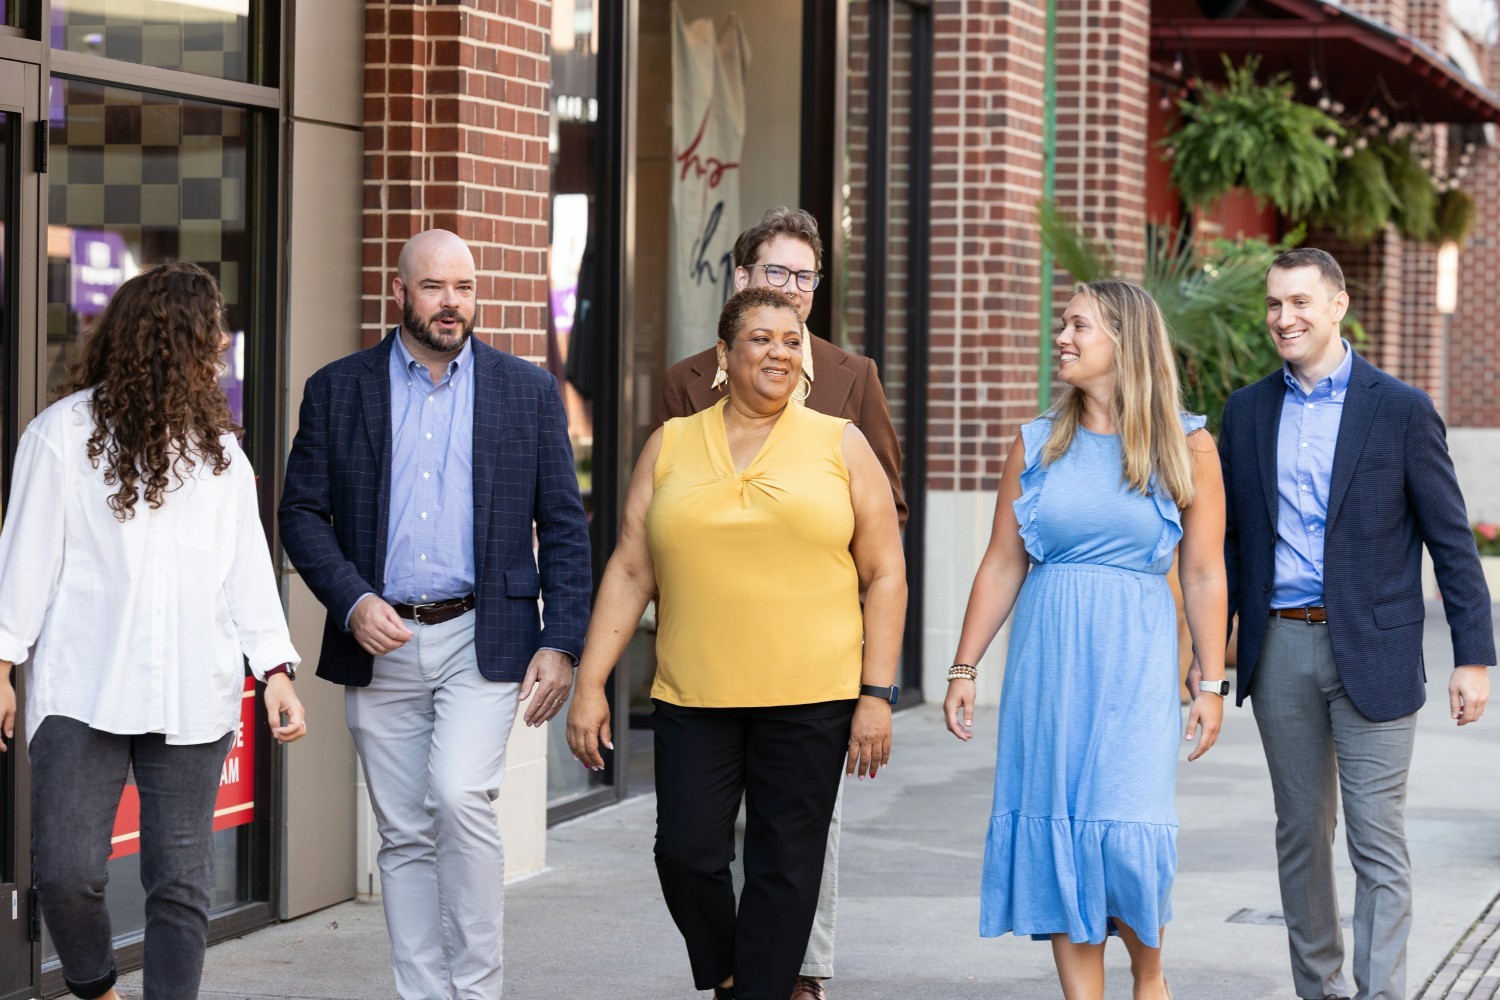 Team members take a break from work for an afternoon walk around our Atlanta office.